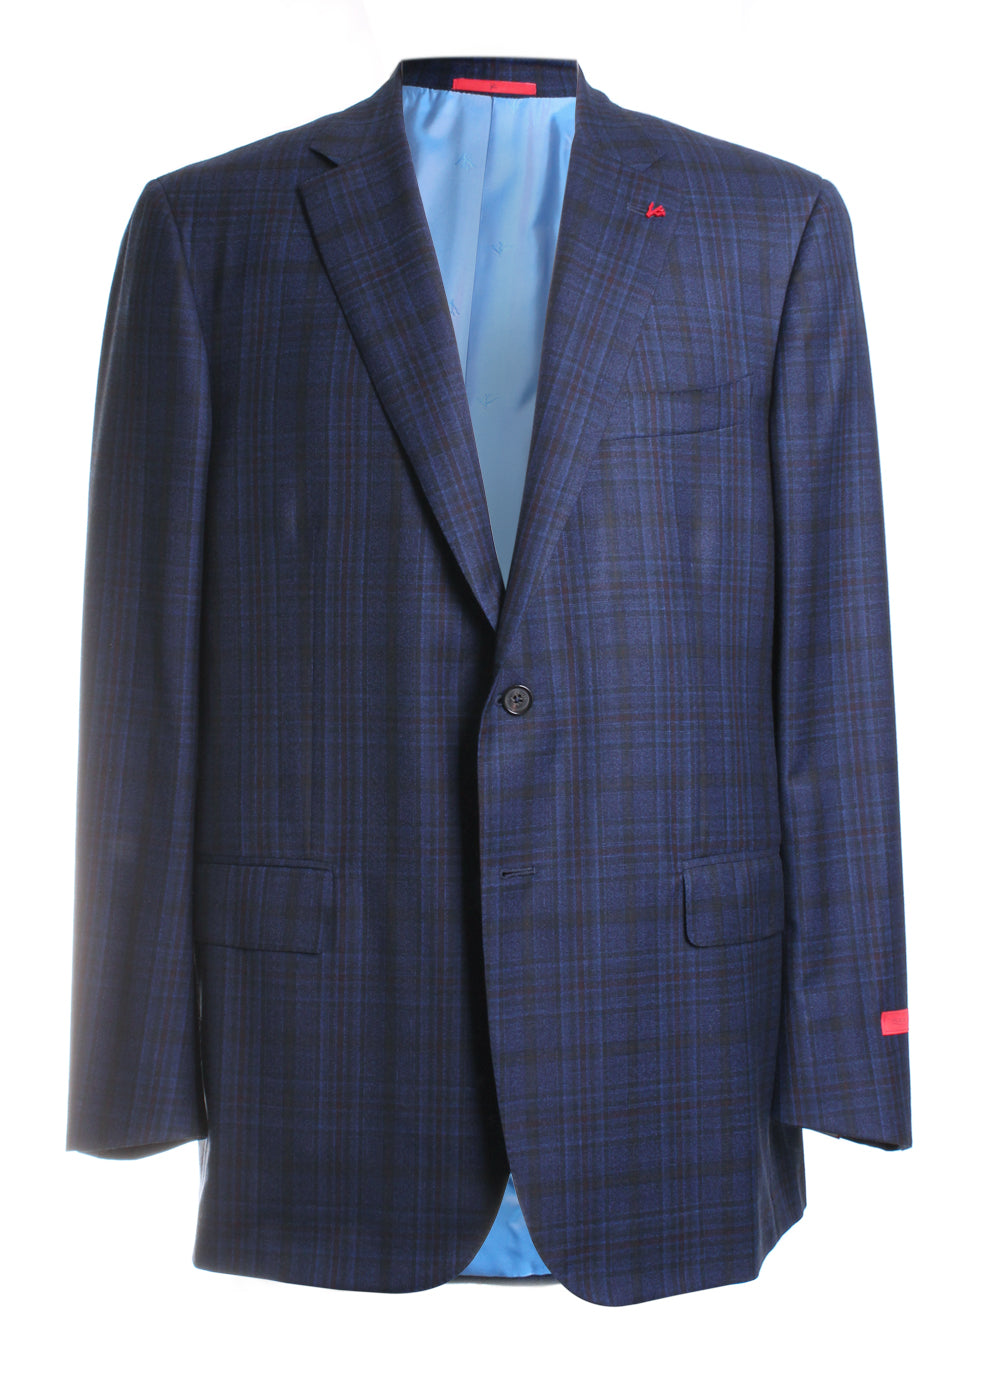 Isaia Two-Tone Plaid Sport Coat in Blue/Black